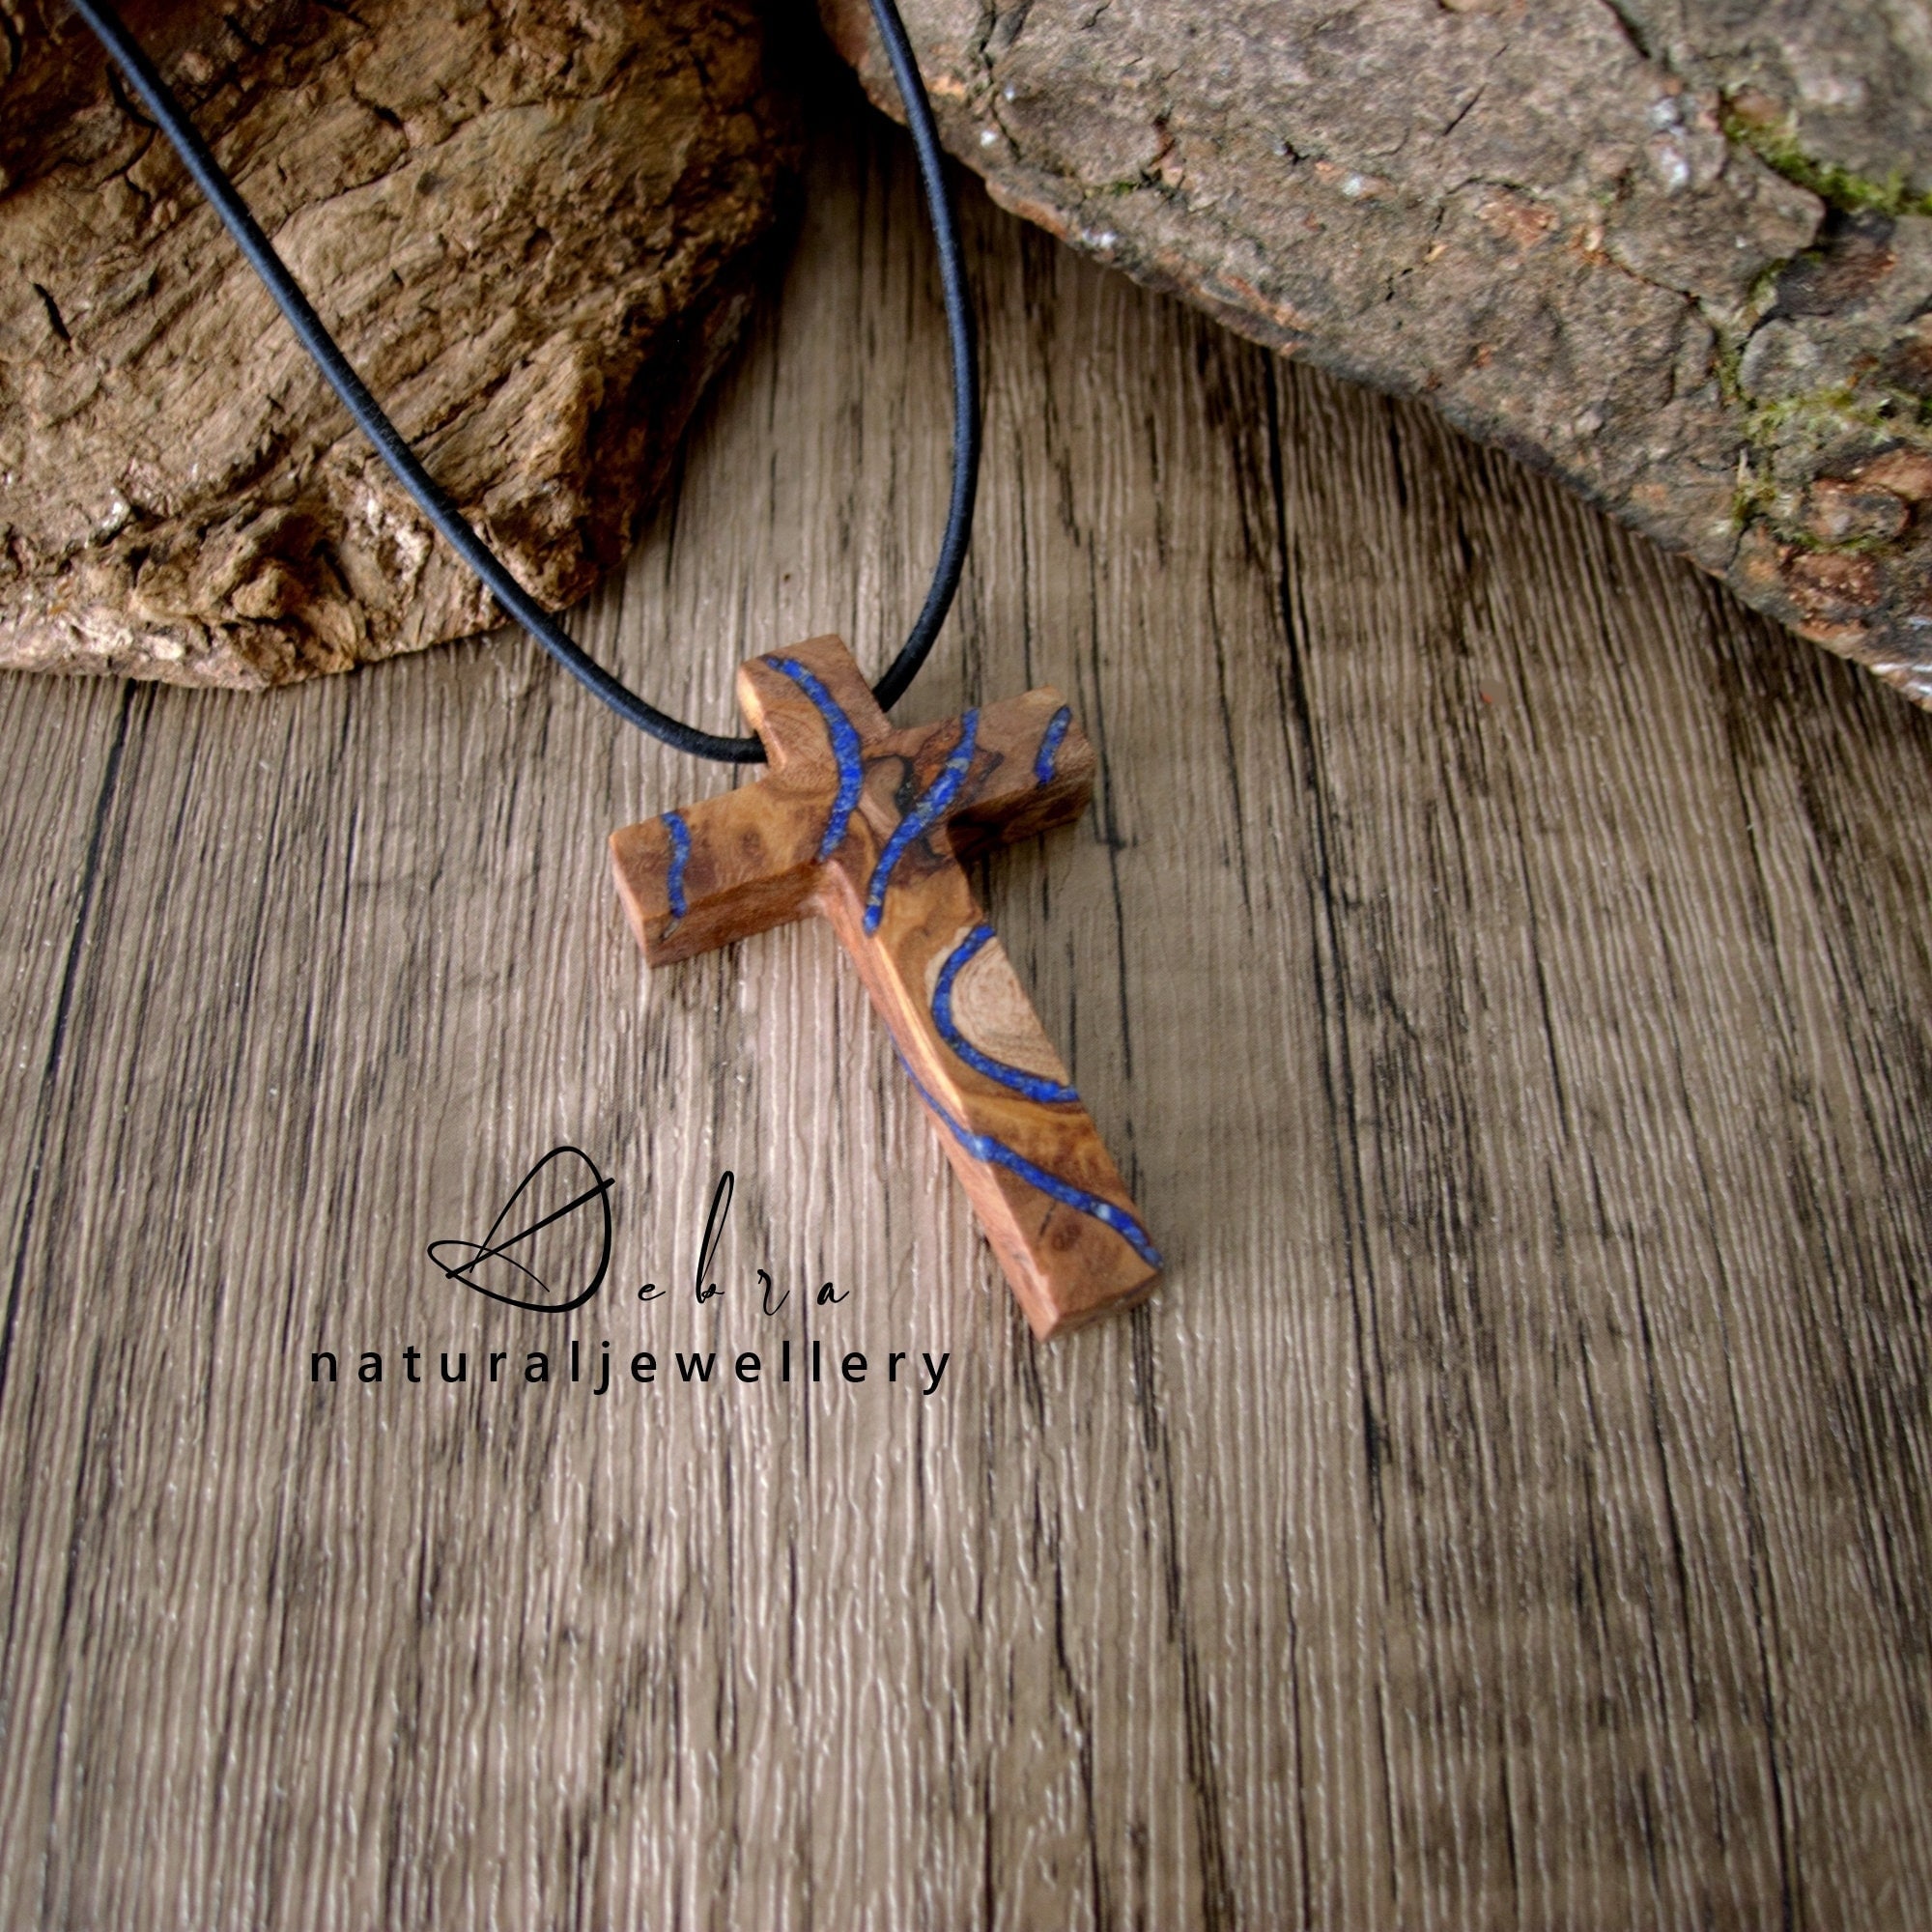 Stitched Bat Wood Inlay Cross Pendant and Chain